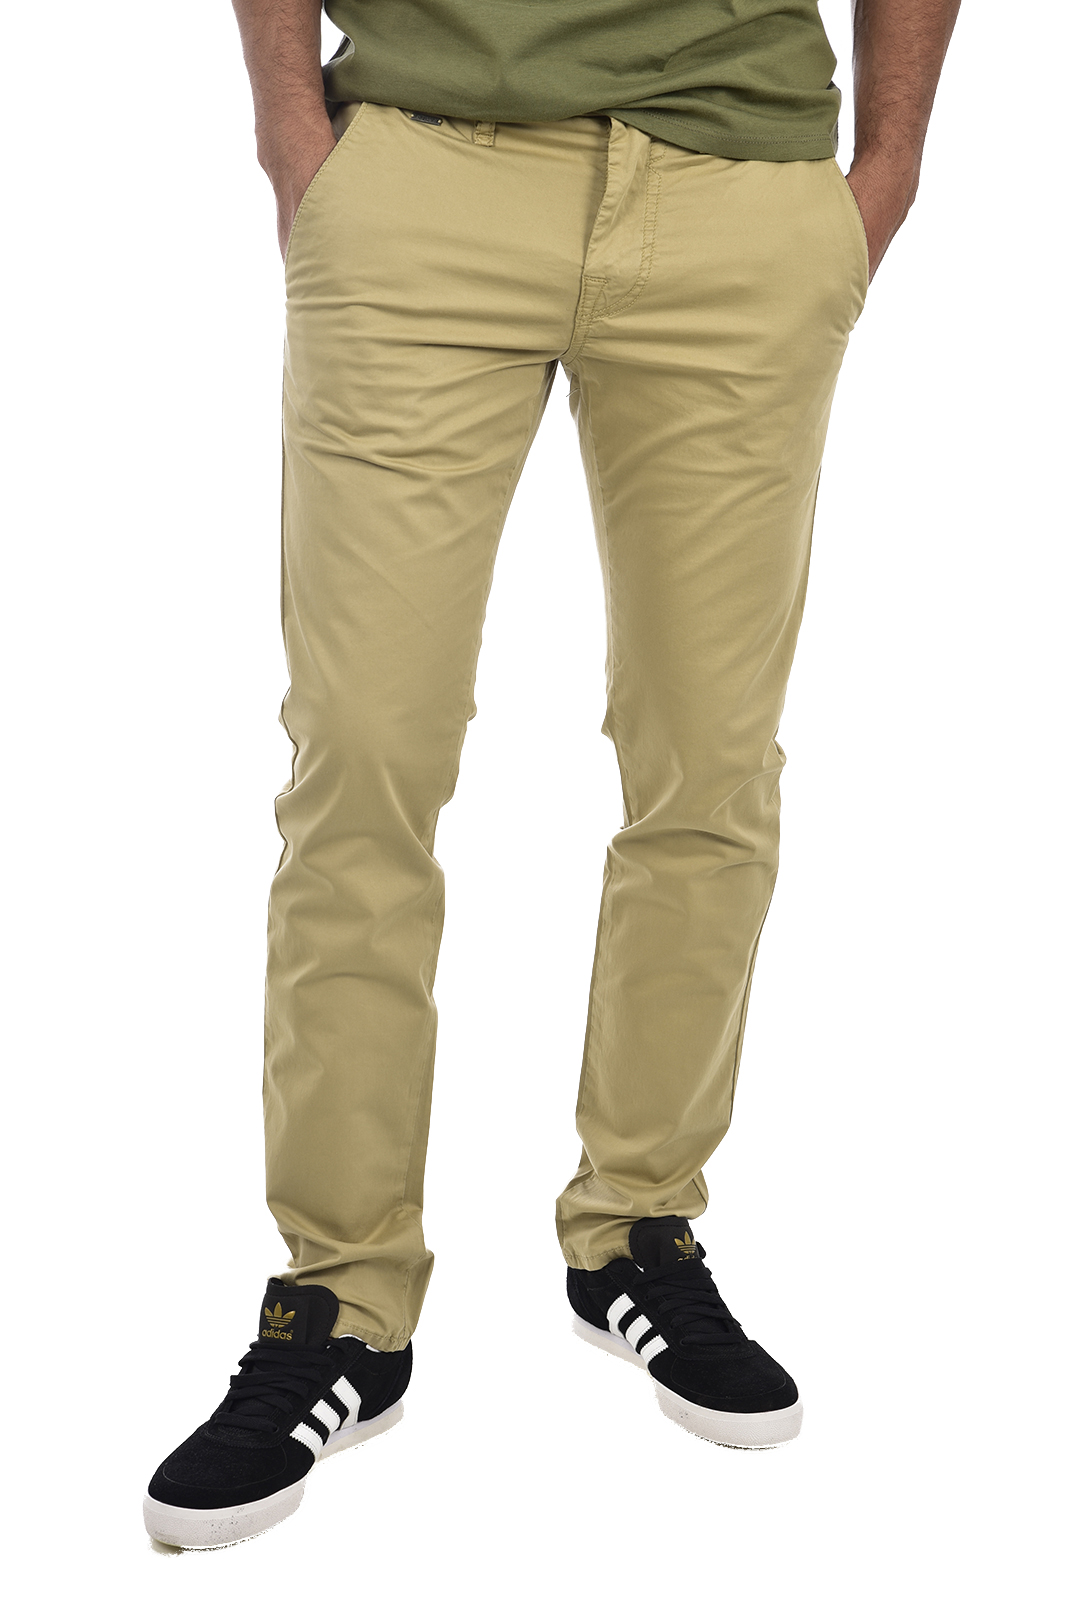 Guess Chino Skinny Beige M91b29 Taille Basse